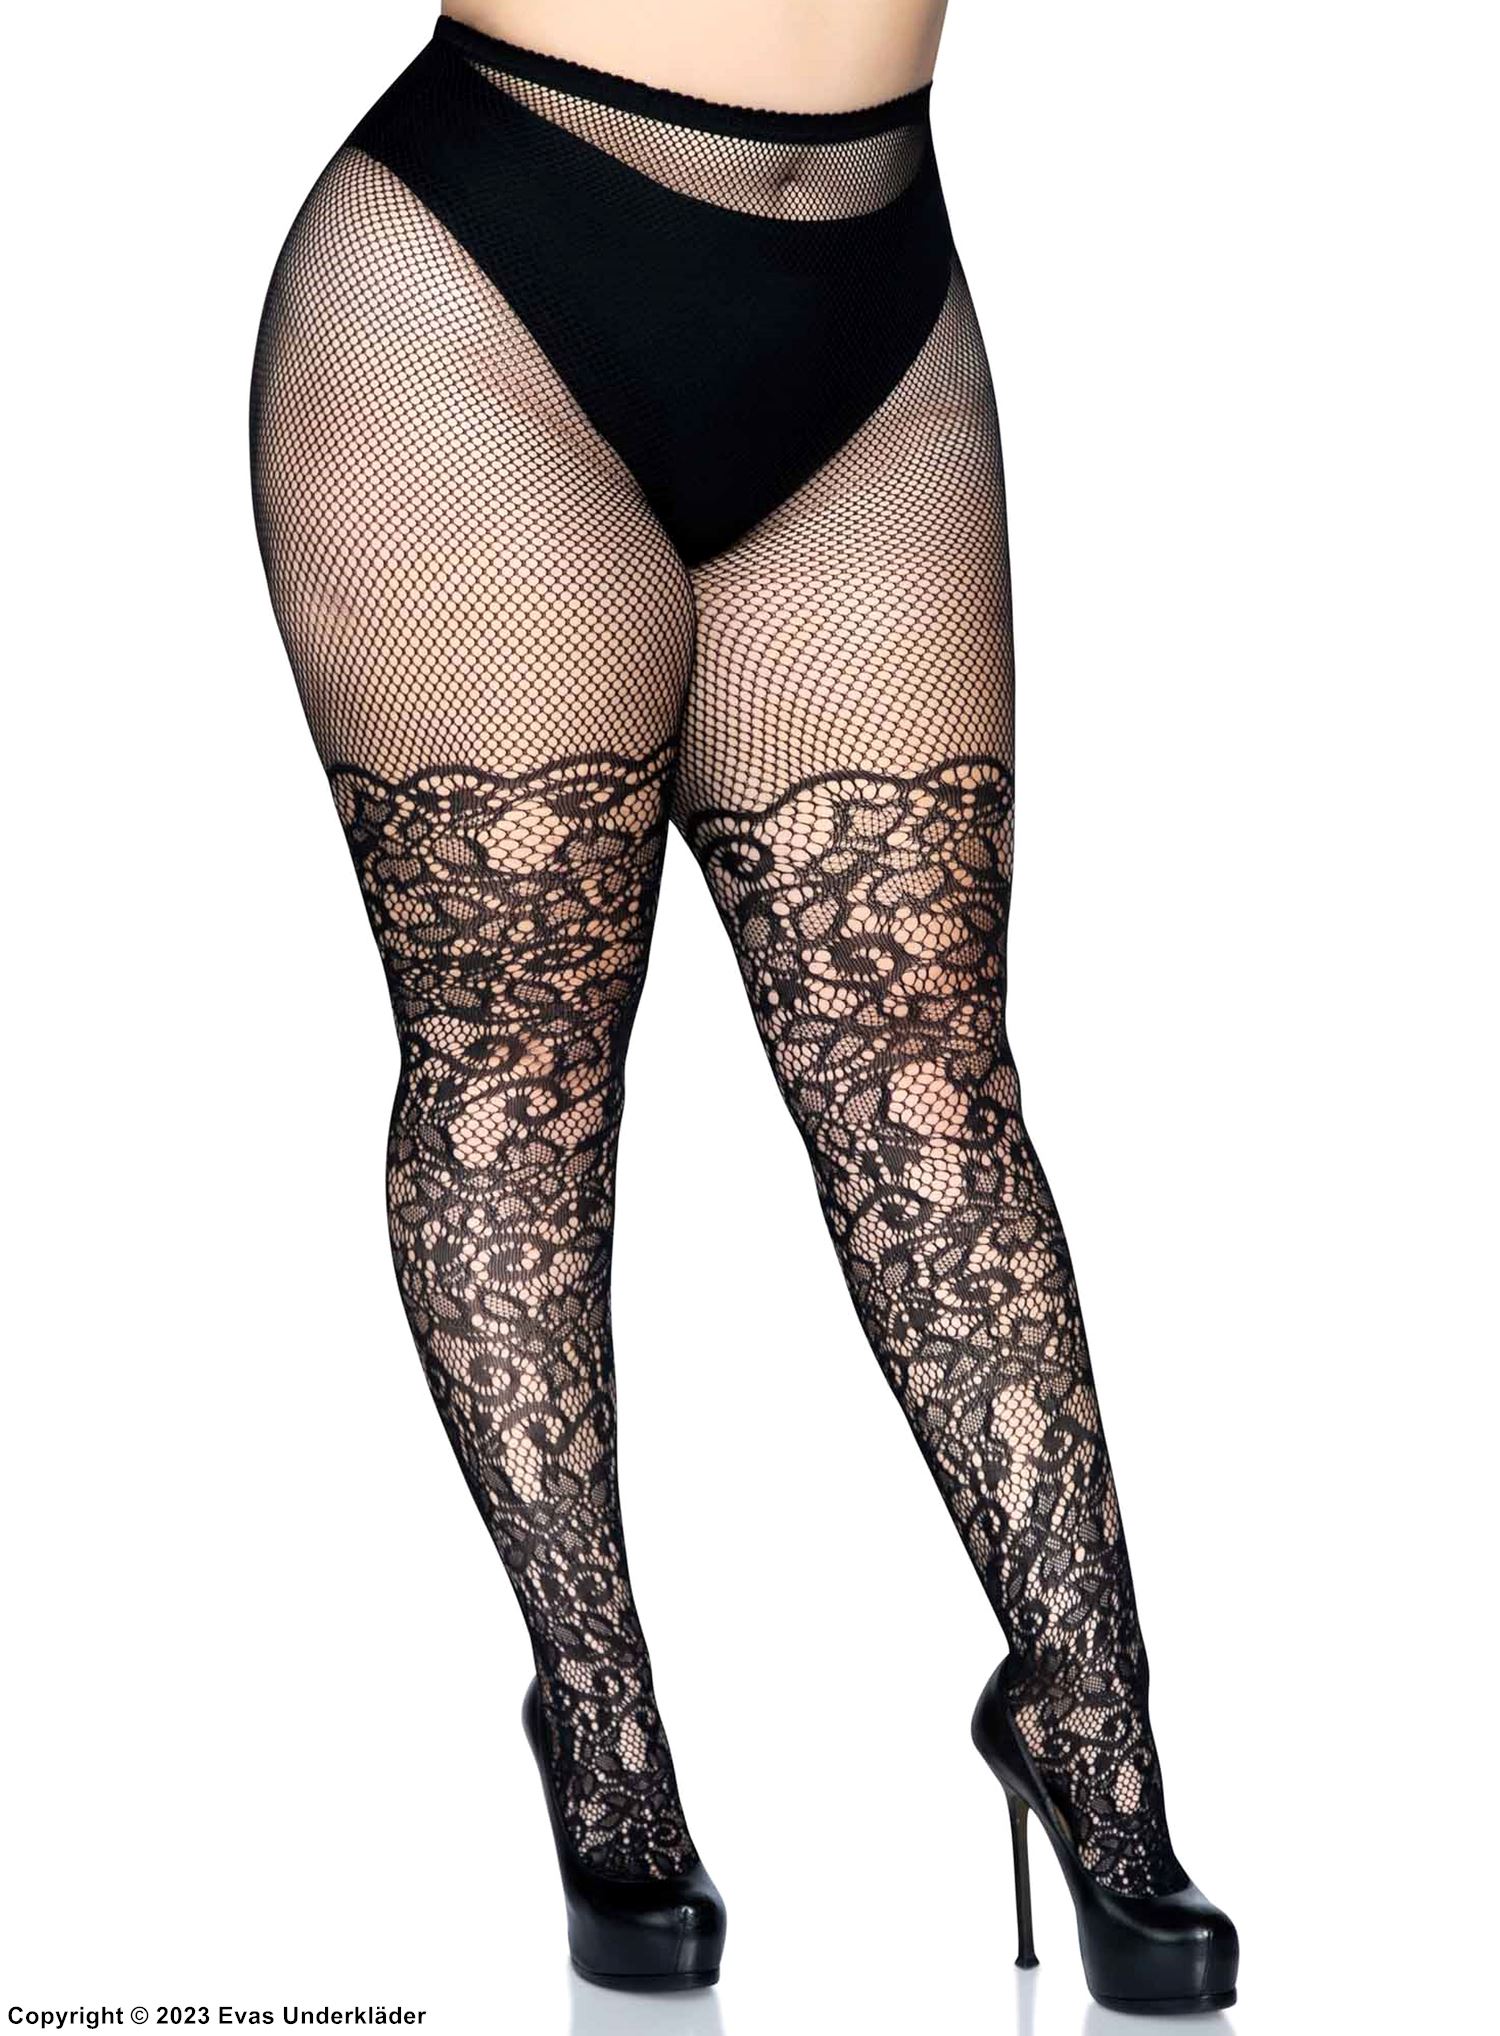 Patterned pantyhose, small fishnet, lace, plus size